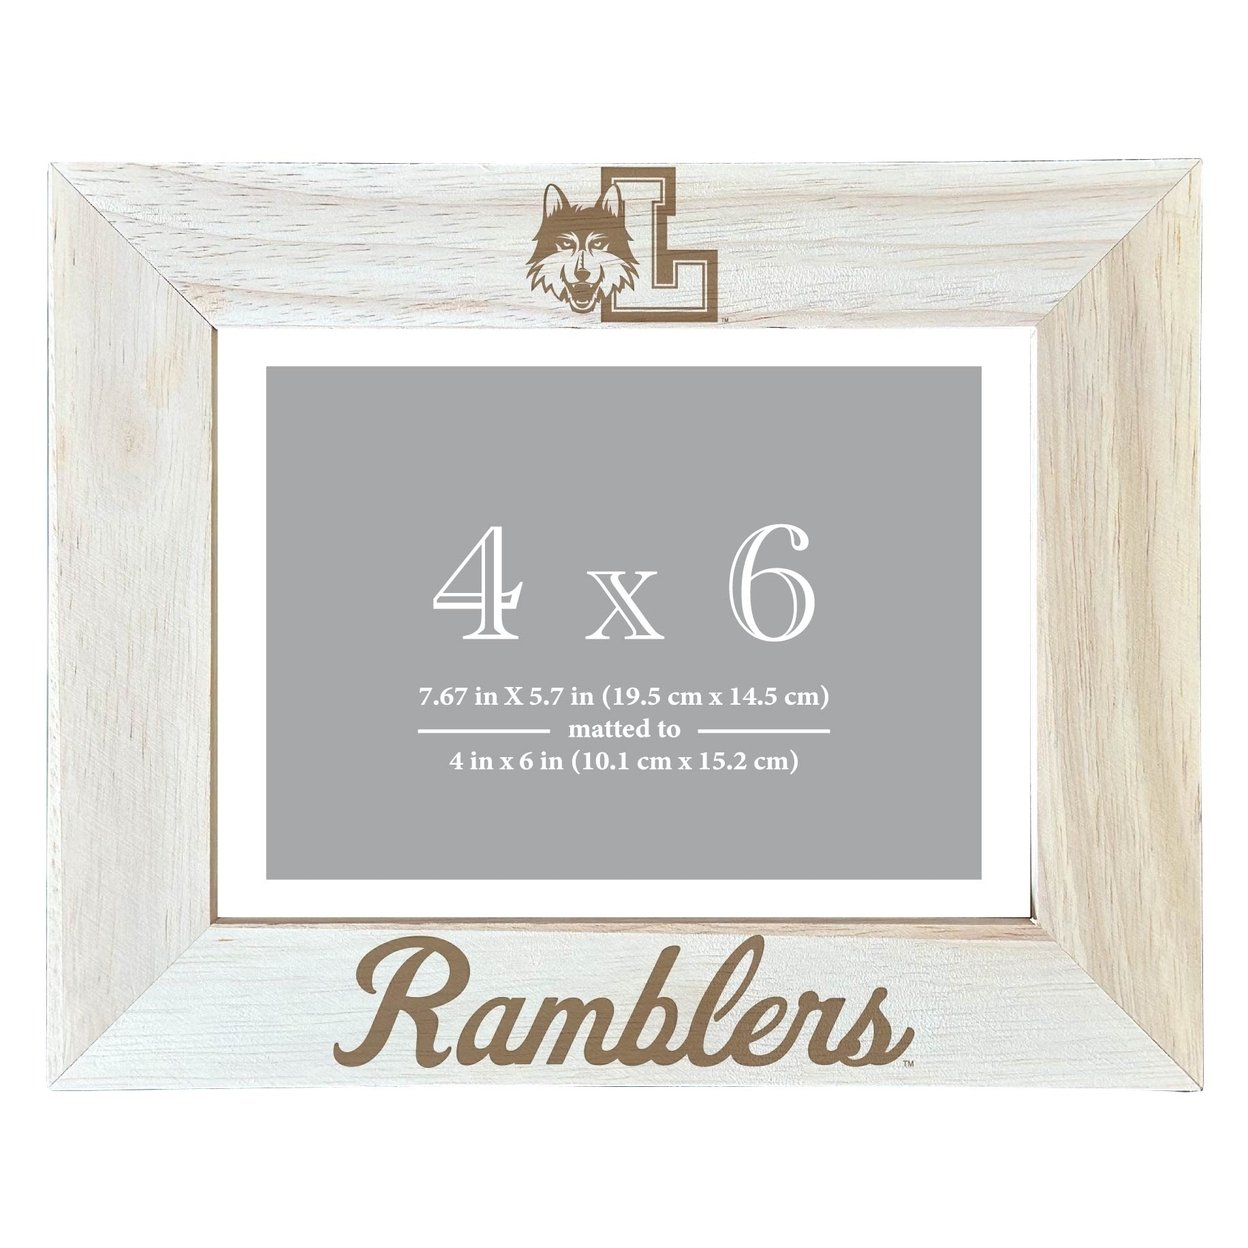 Loyola University Ramblers Wooden Photo Frame Matted To 4 X 6 Inch - Etched